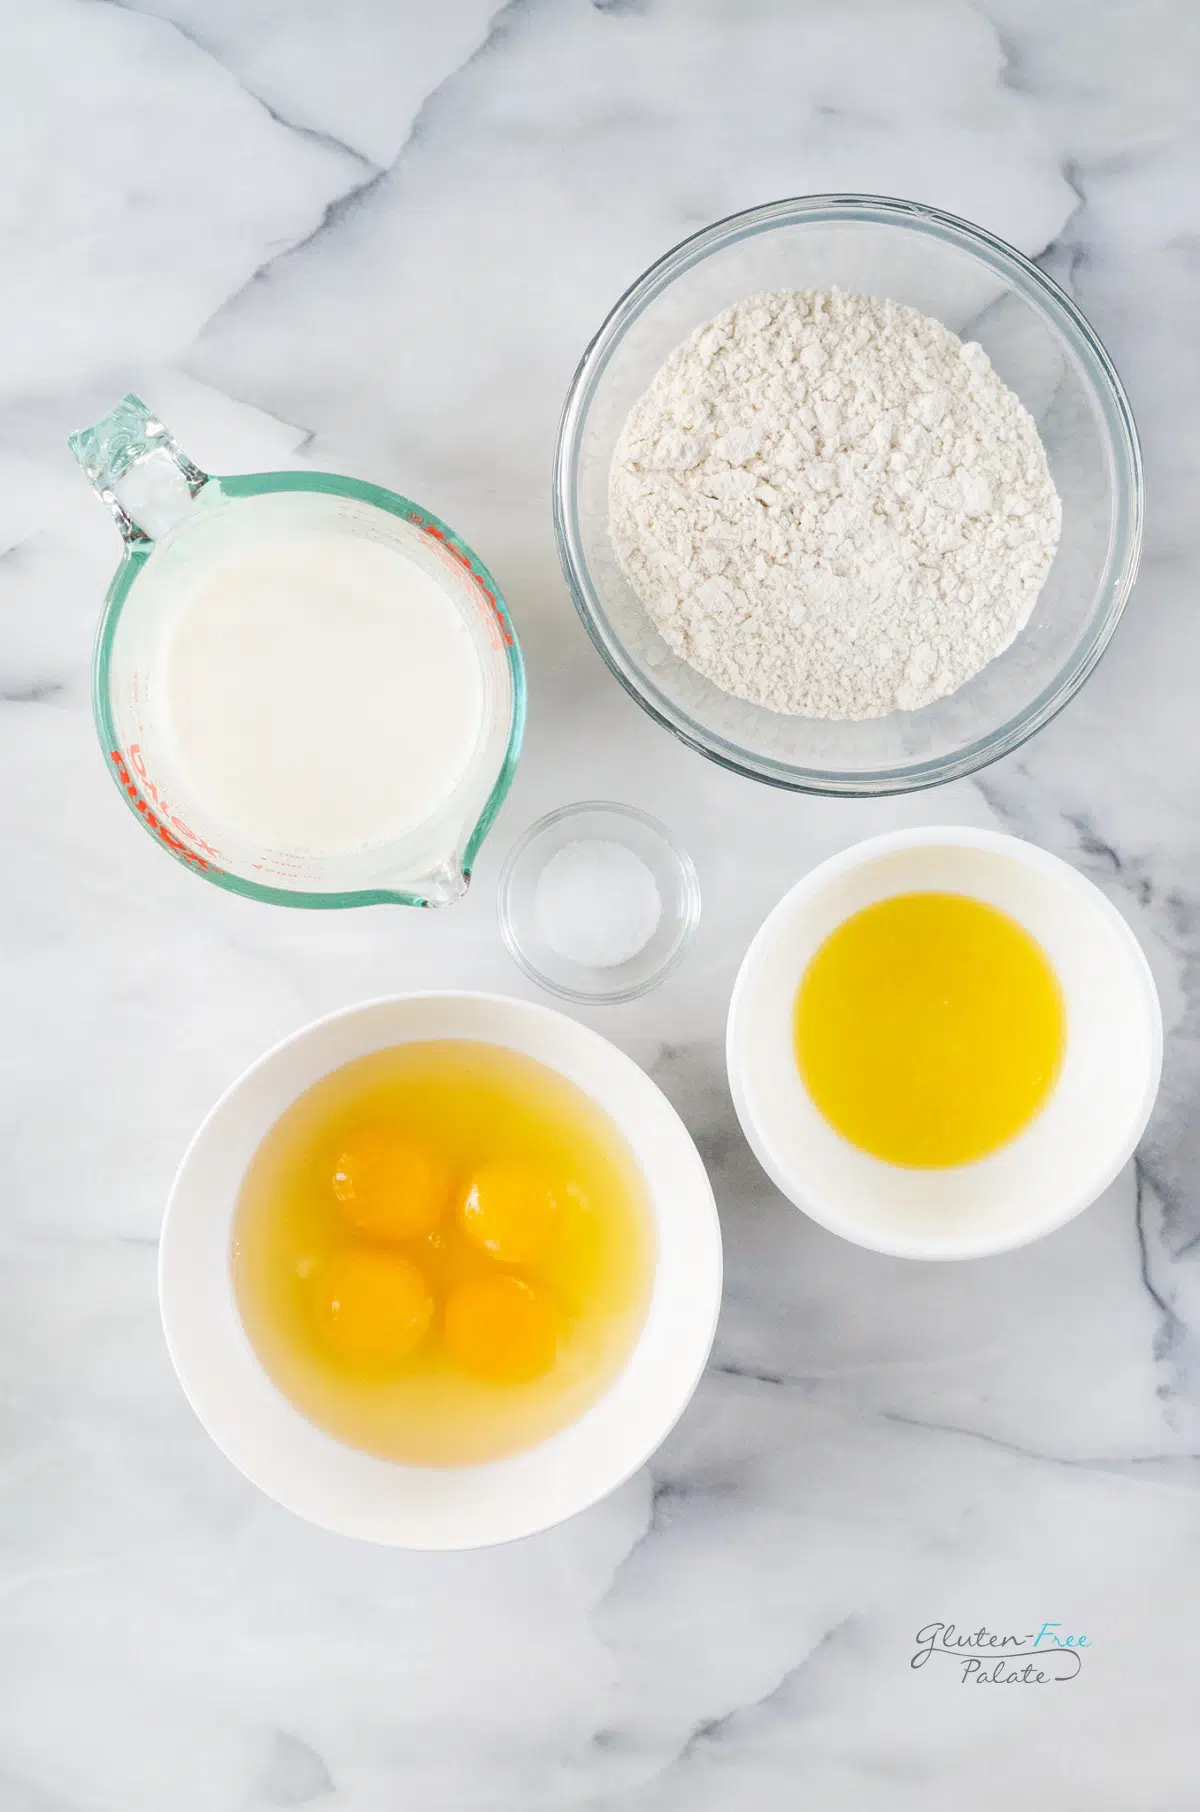 the ingredients for gluten-free popovers measured into separate bowls on a marble counter